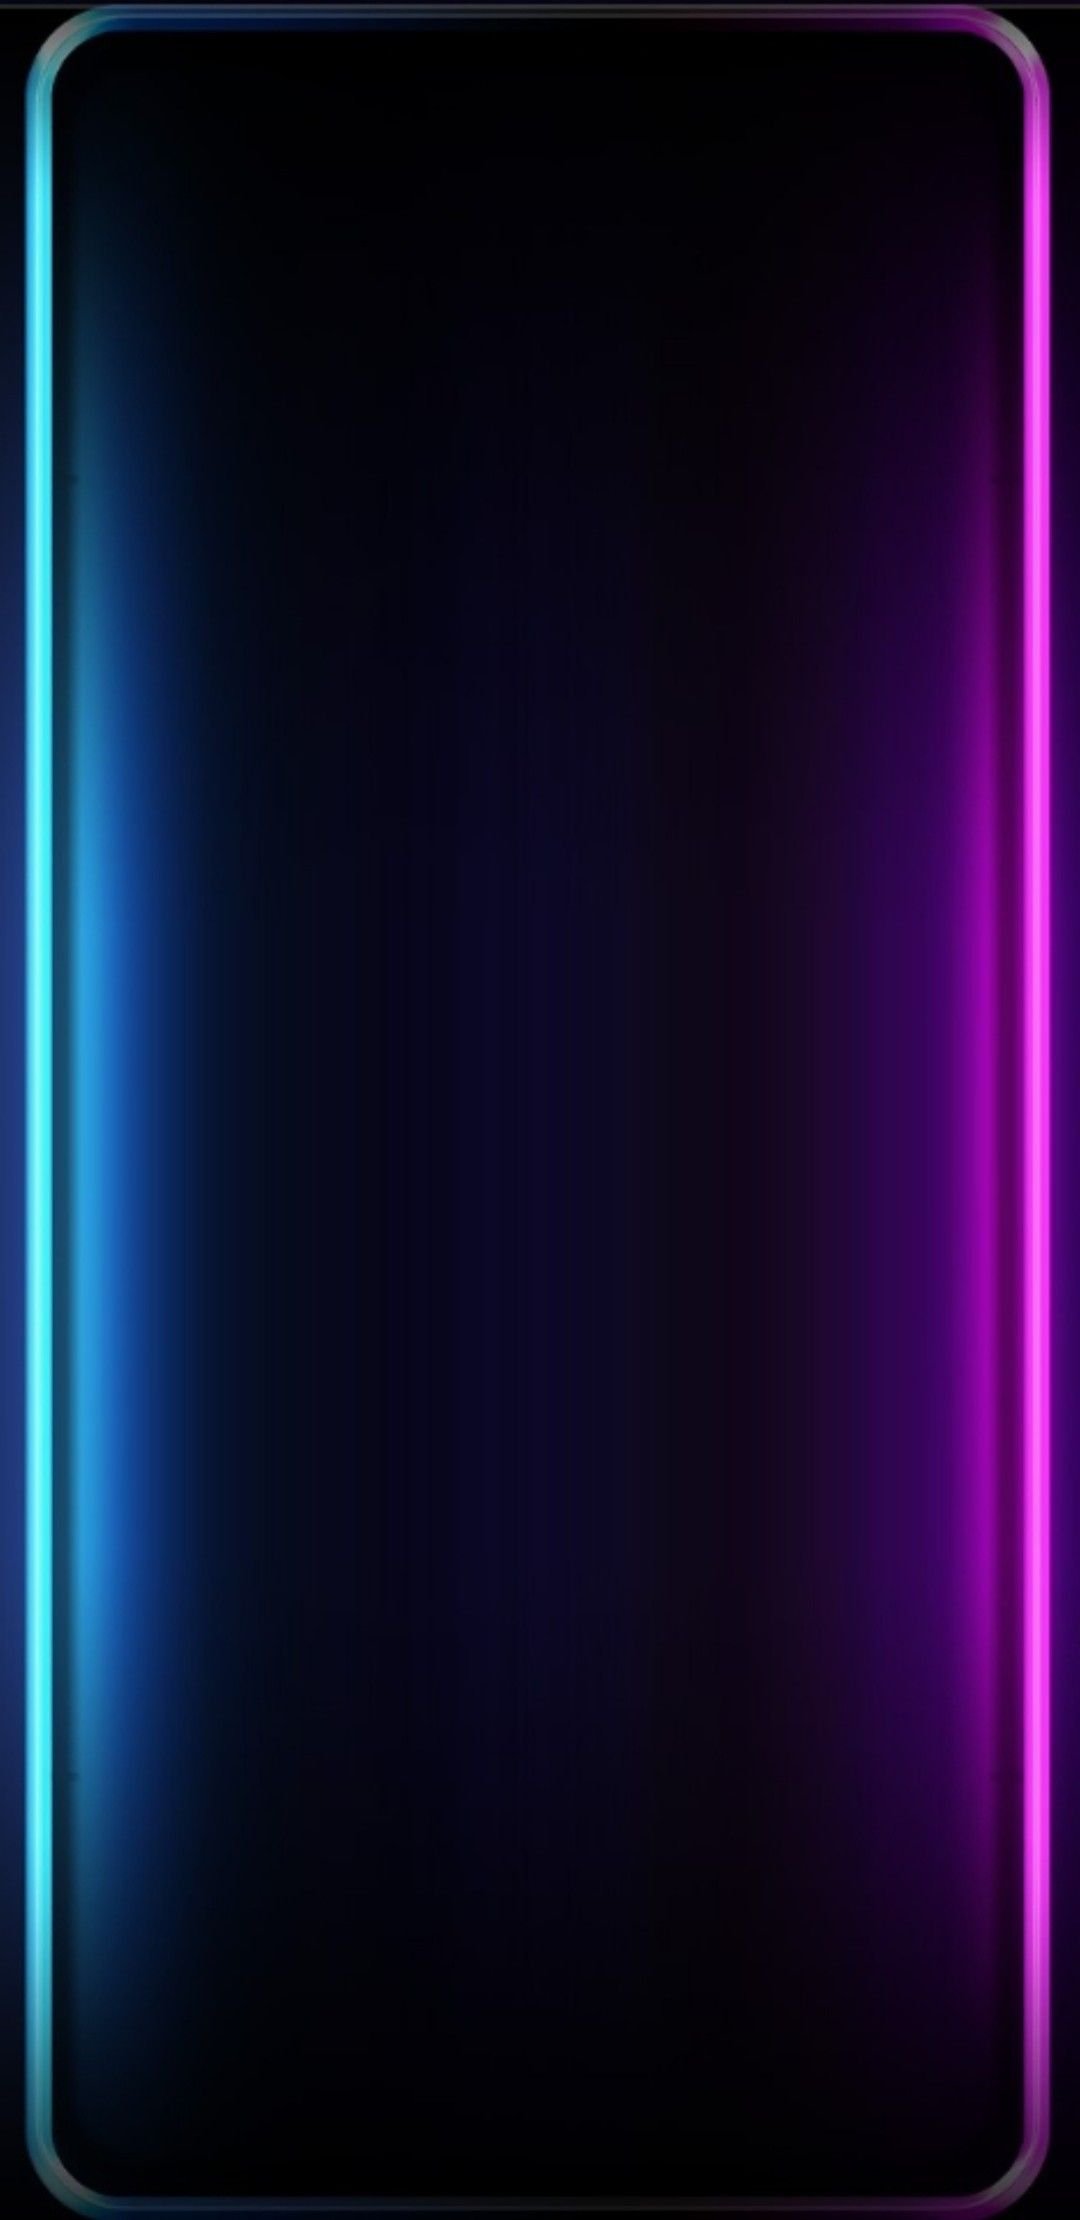 Iridescence Dark by AR7 iPhone Wallpapers Free Download